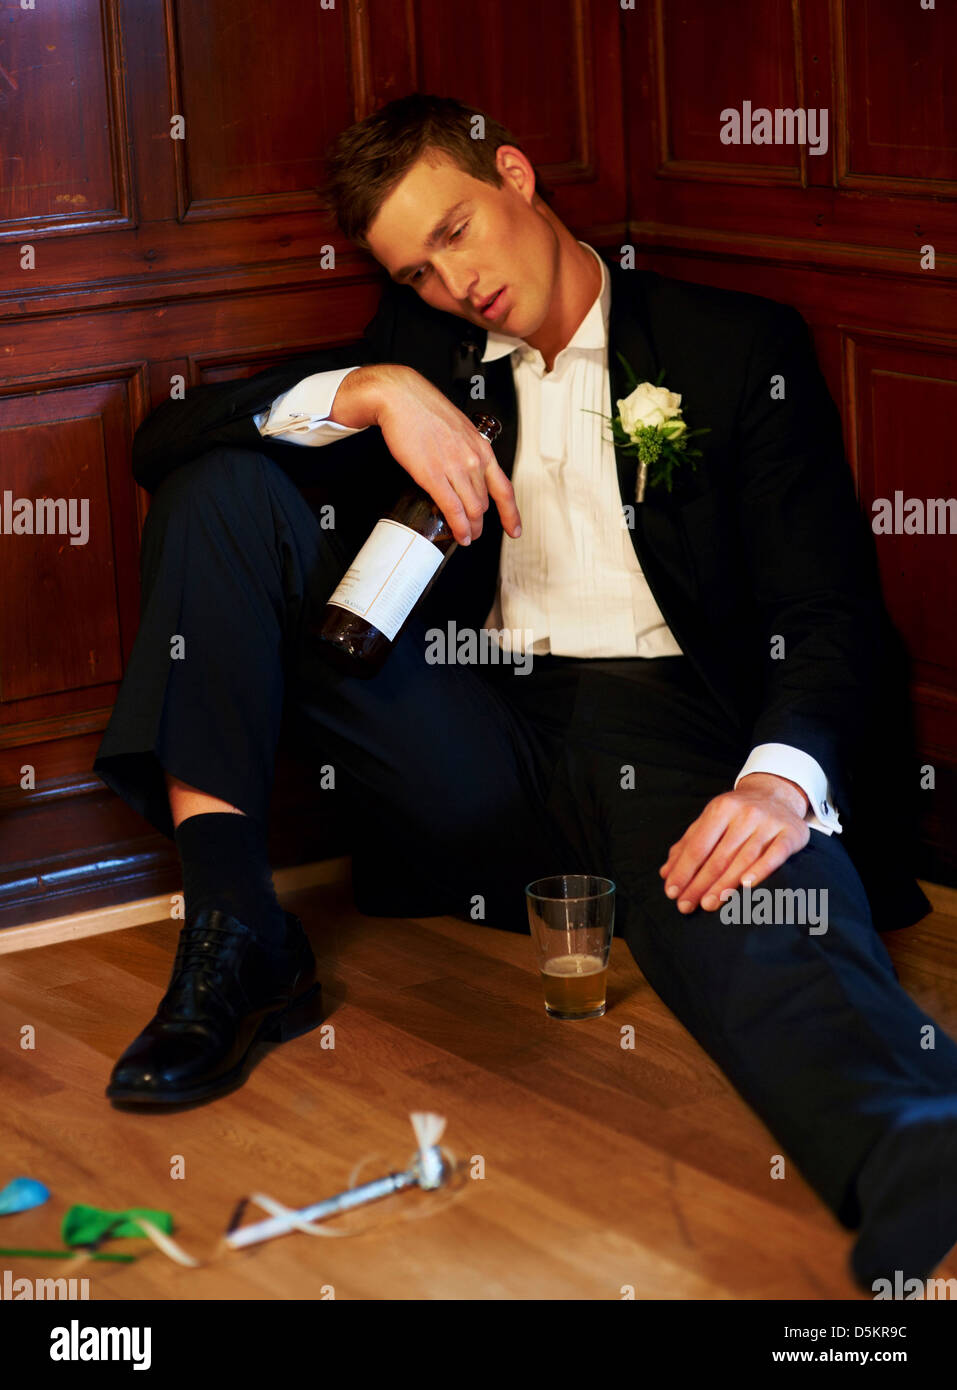 drunk hi-res Alamy jacket and stock Dinner images - photography